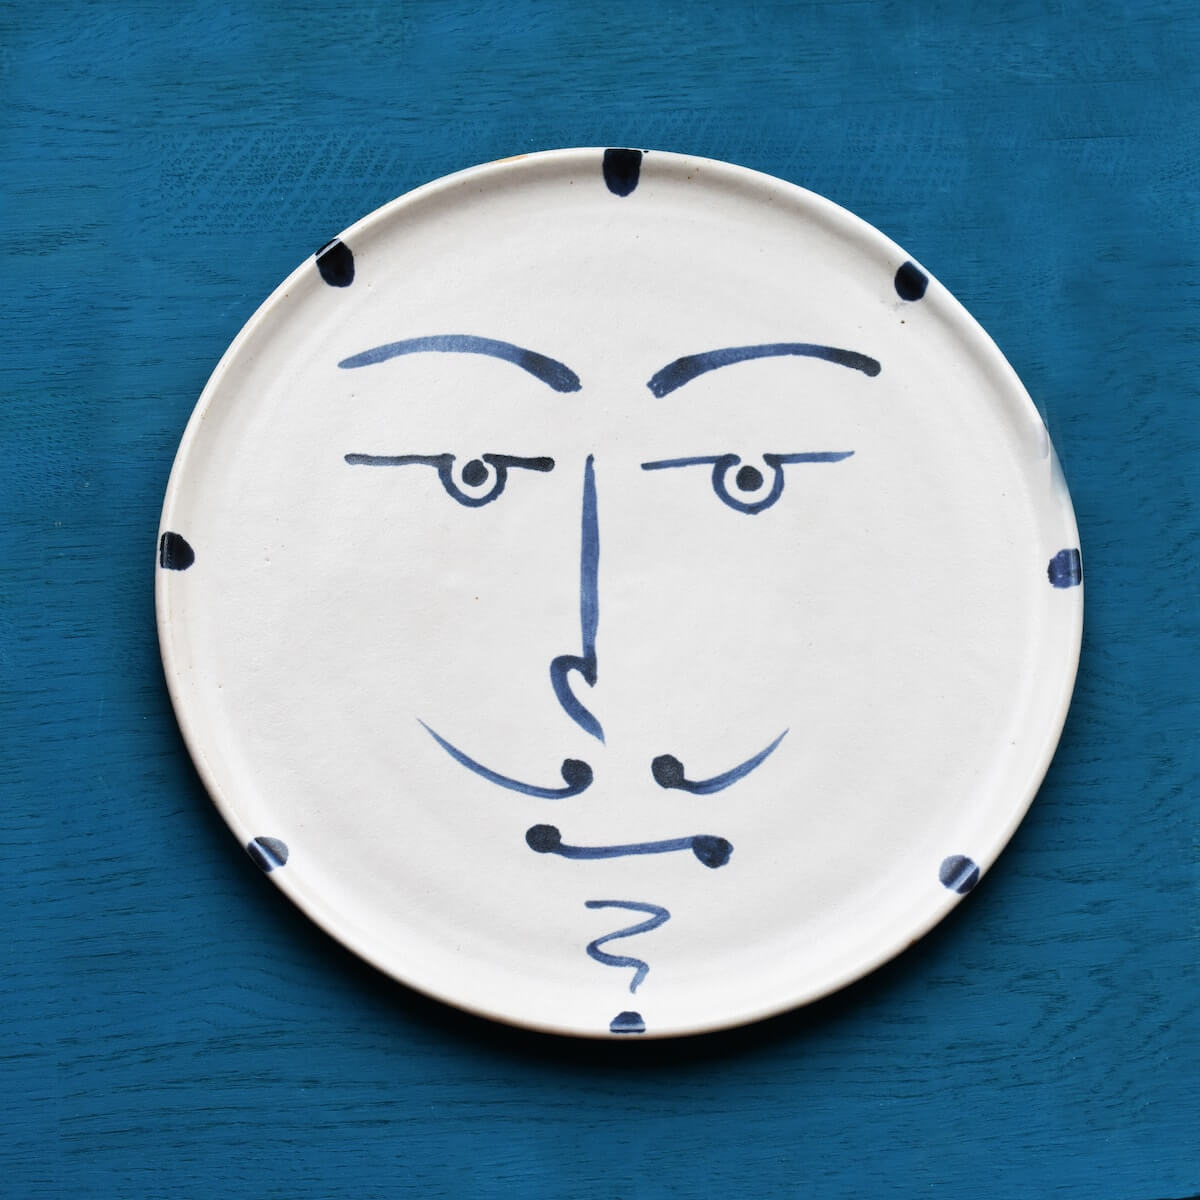 Santiago Wall plate by Kinkatou for AUTHOR's collection of British-made unique homeware